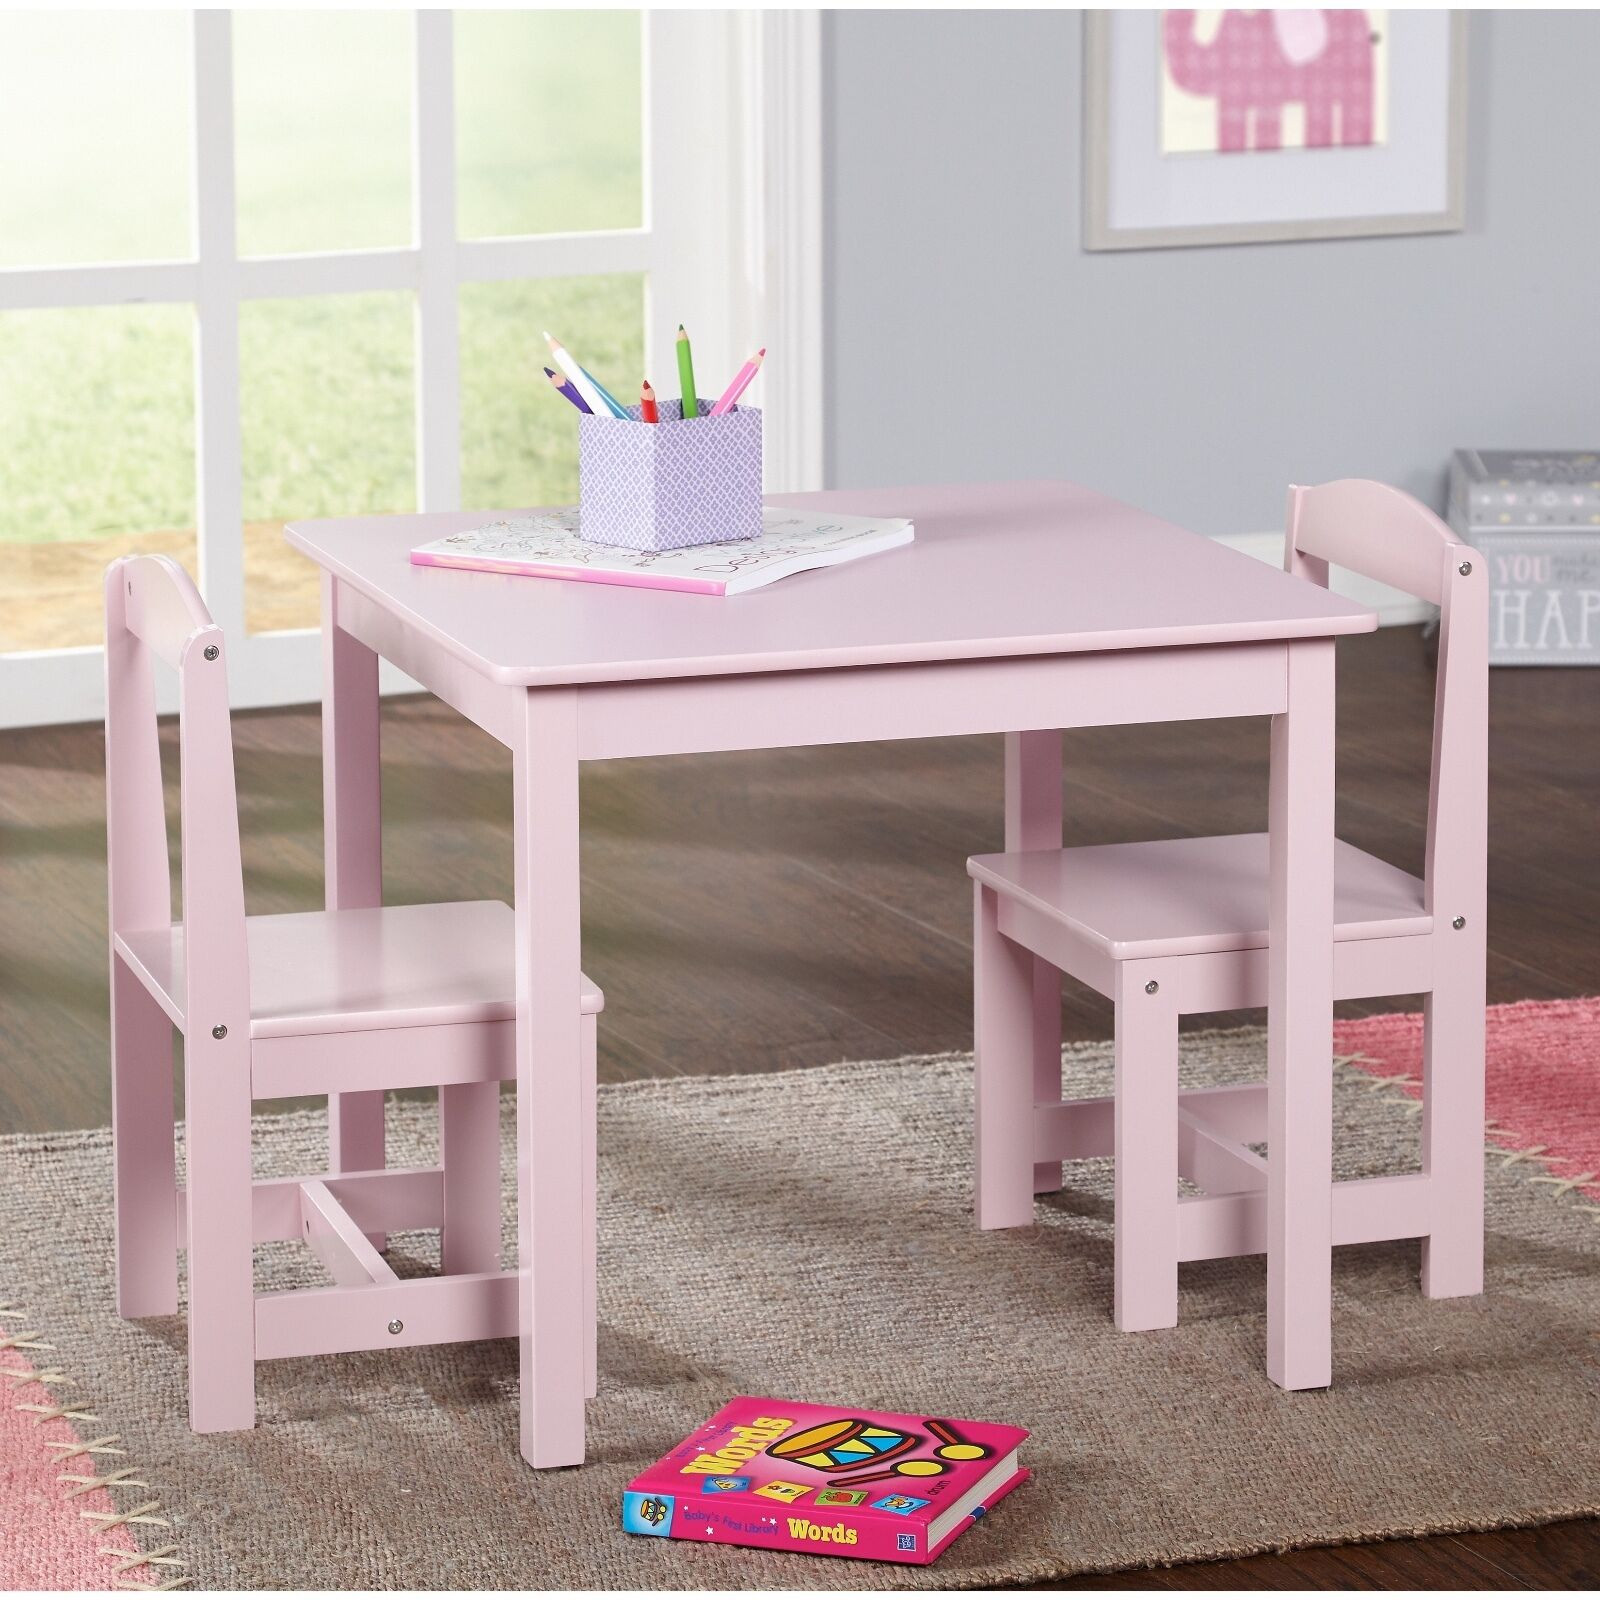 Study Table For Kids
 Study Small Table and Chair Set Generic 3 Piece Wood